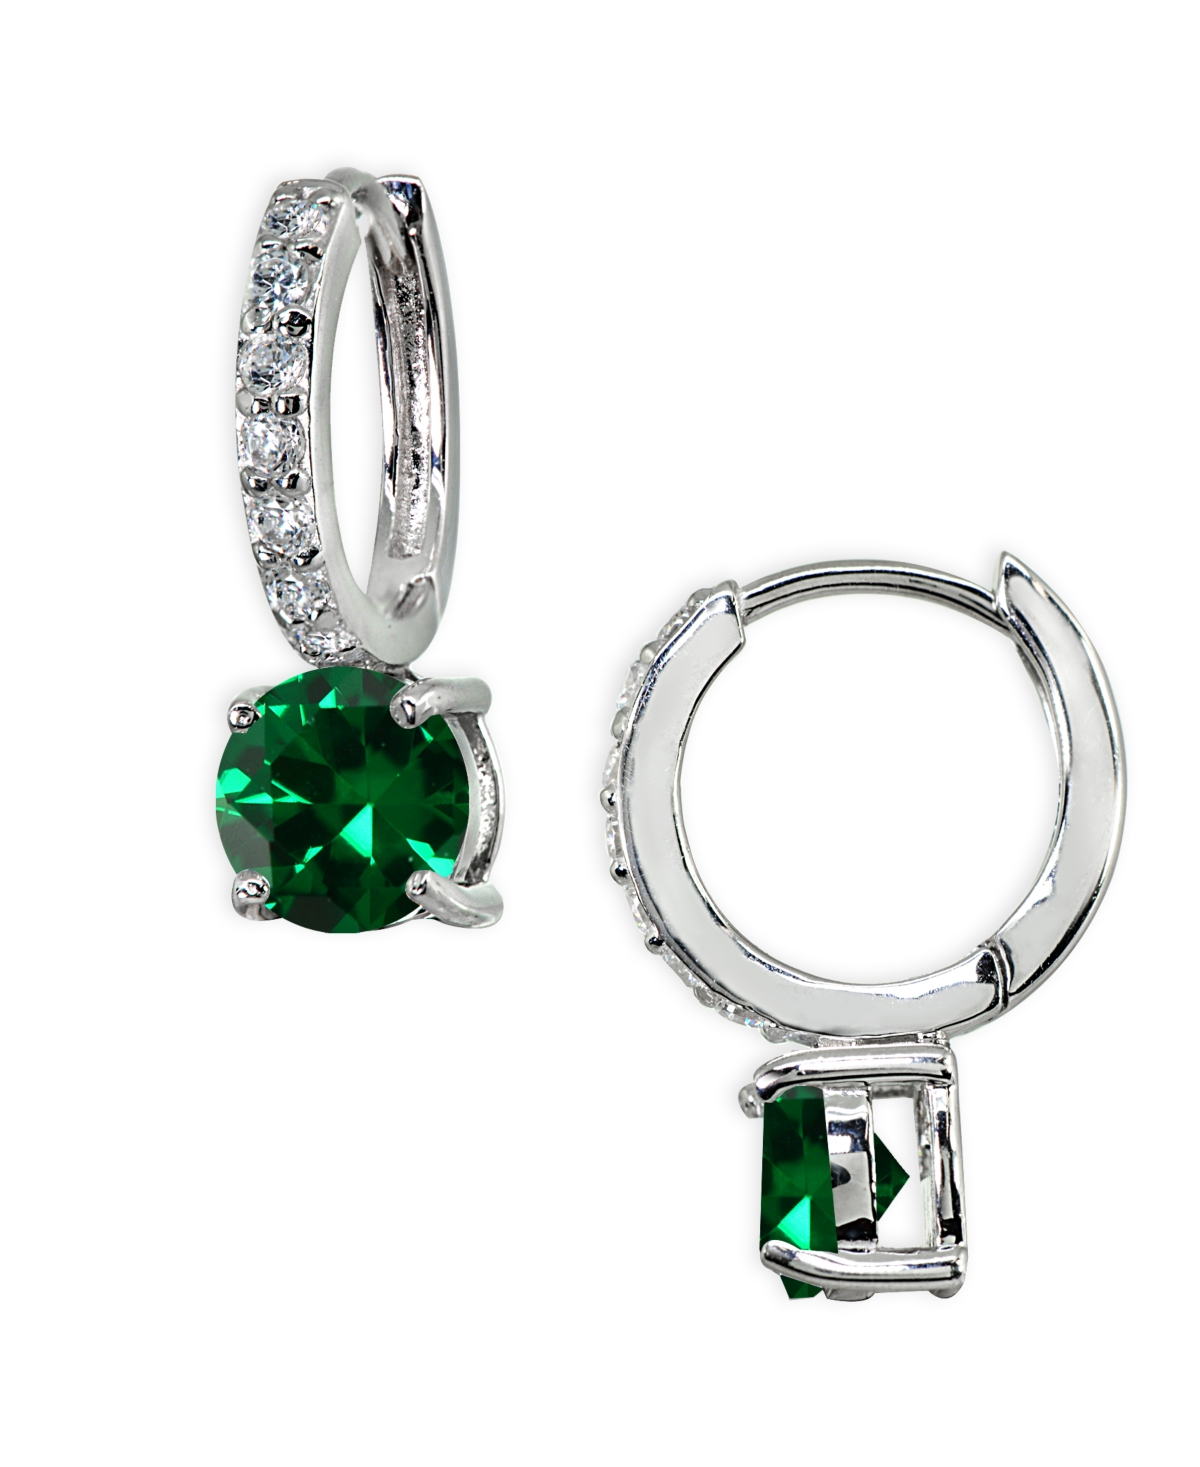 Giani Bernini Colored Cubic Zirconia Huggie Hoop Earrings In Sterling Silver Or 18k Gold Over Silver (also Availab In Green,silver